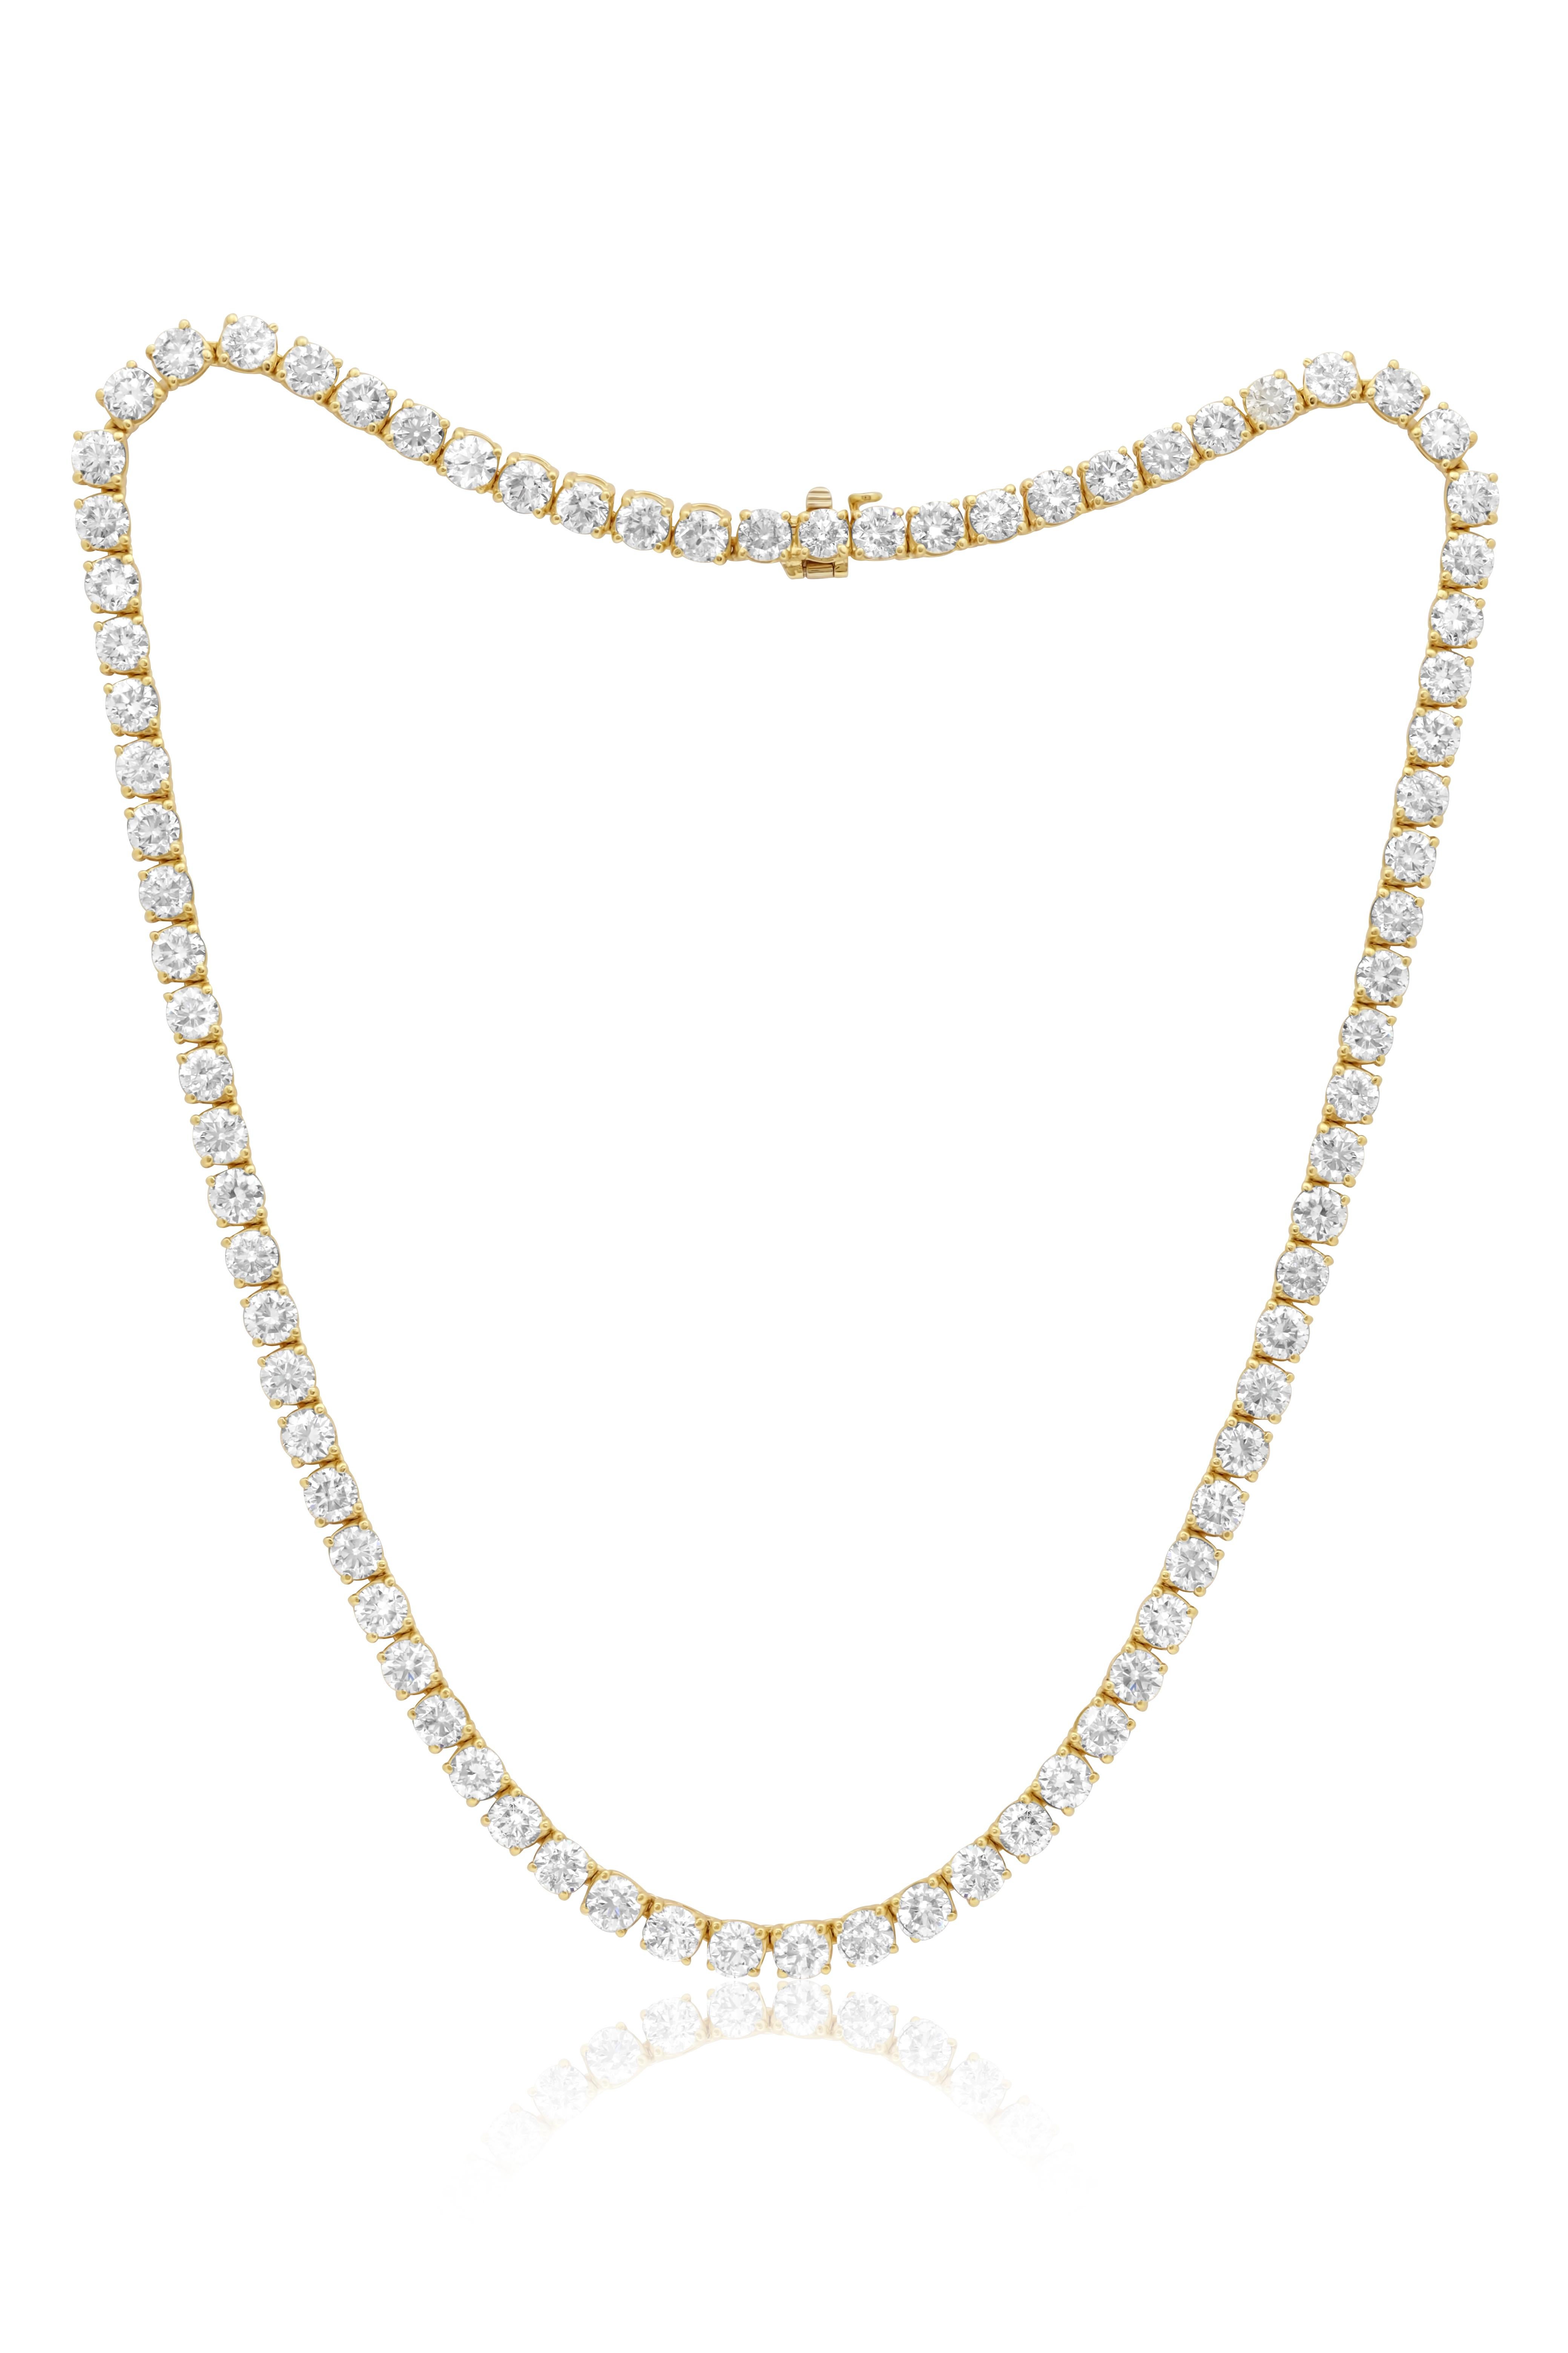 Modern Diana M. Custom 31.50 Cts 4 Prong Round  Diamond 18k Yellow Gold Tennis Necklace For Sale